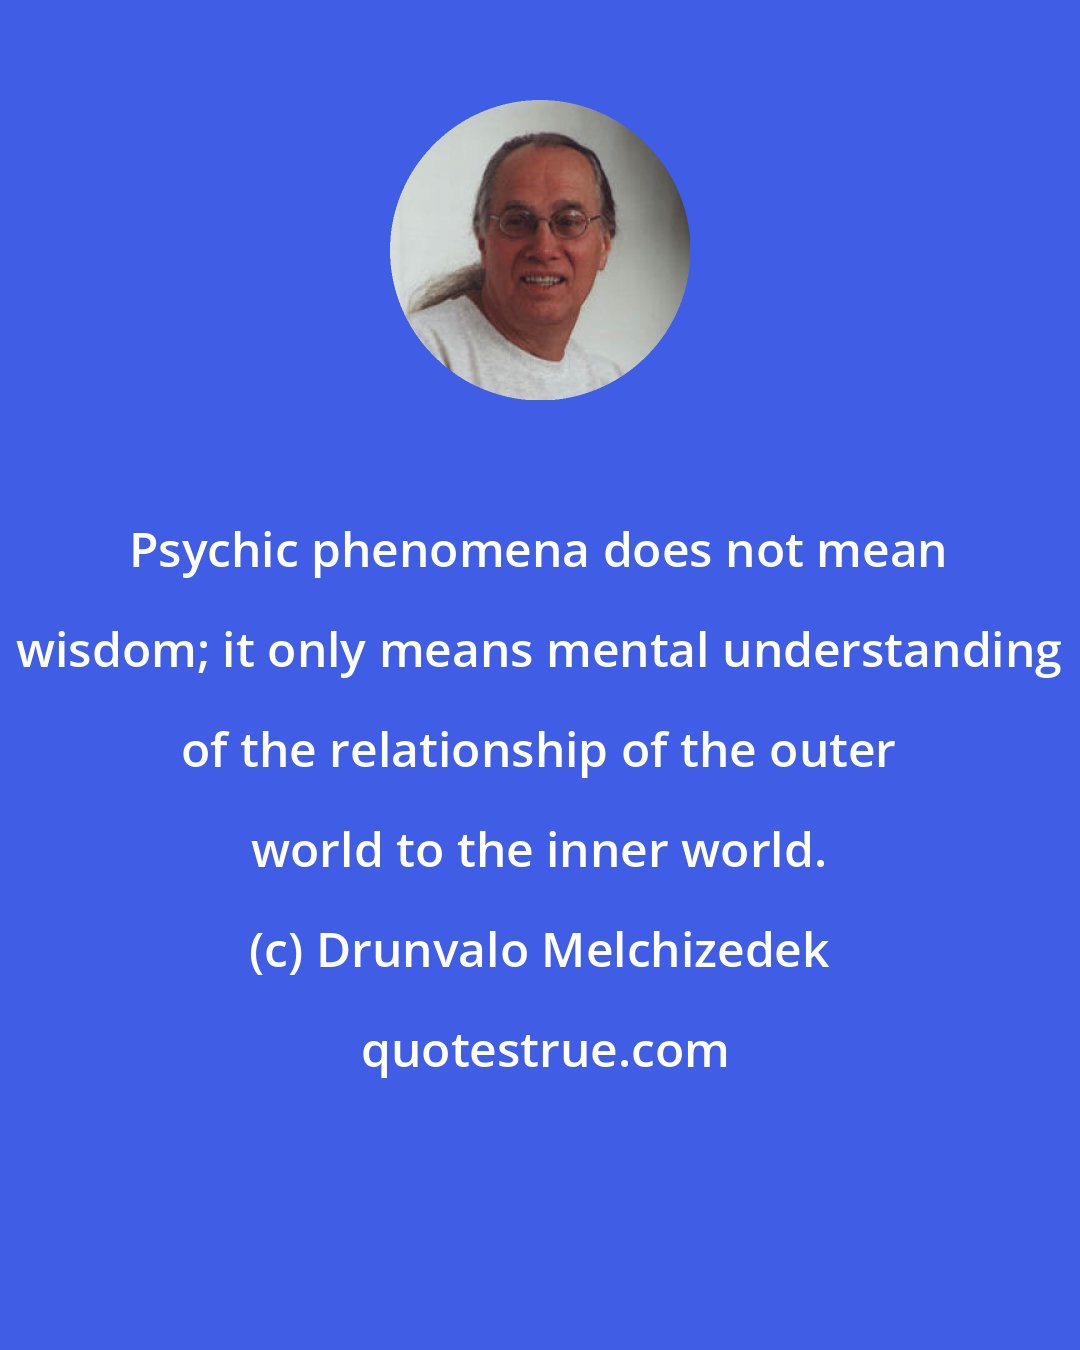 Drunvalo Melchizedek: Psychic phenomena does not mean wisdom; it only means mental understanding of the relationship of the outer world to the inner world.